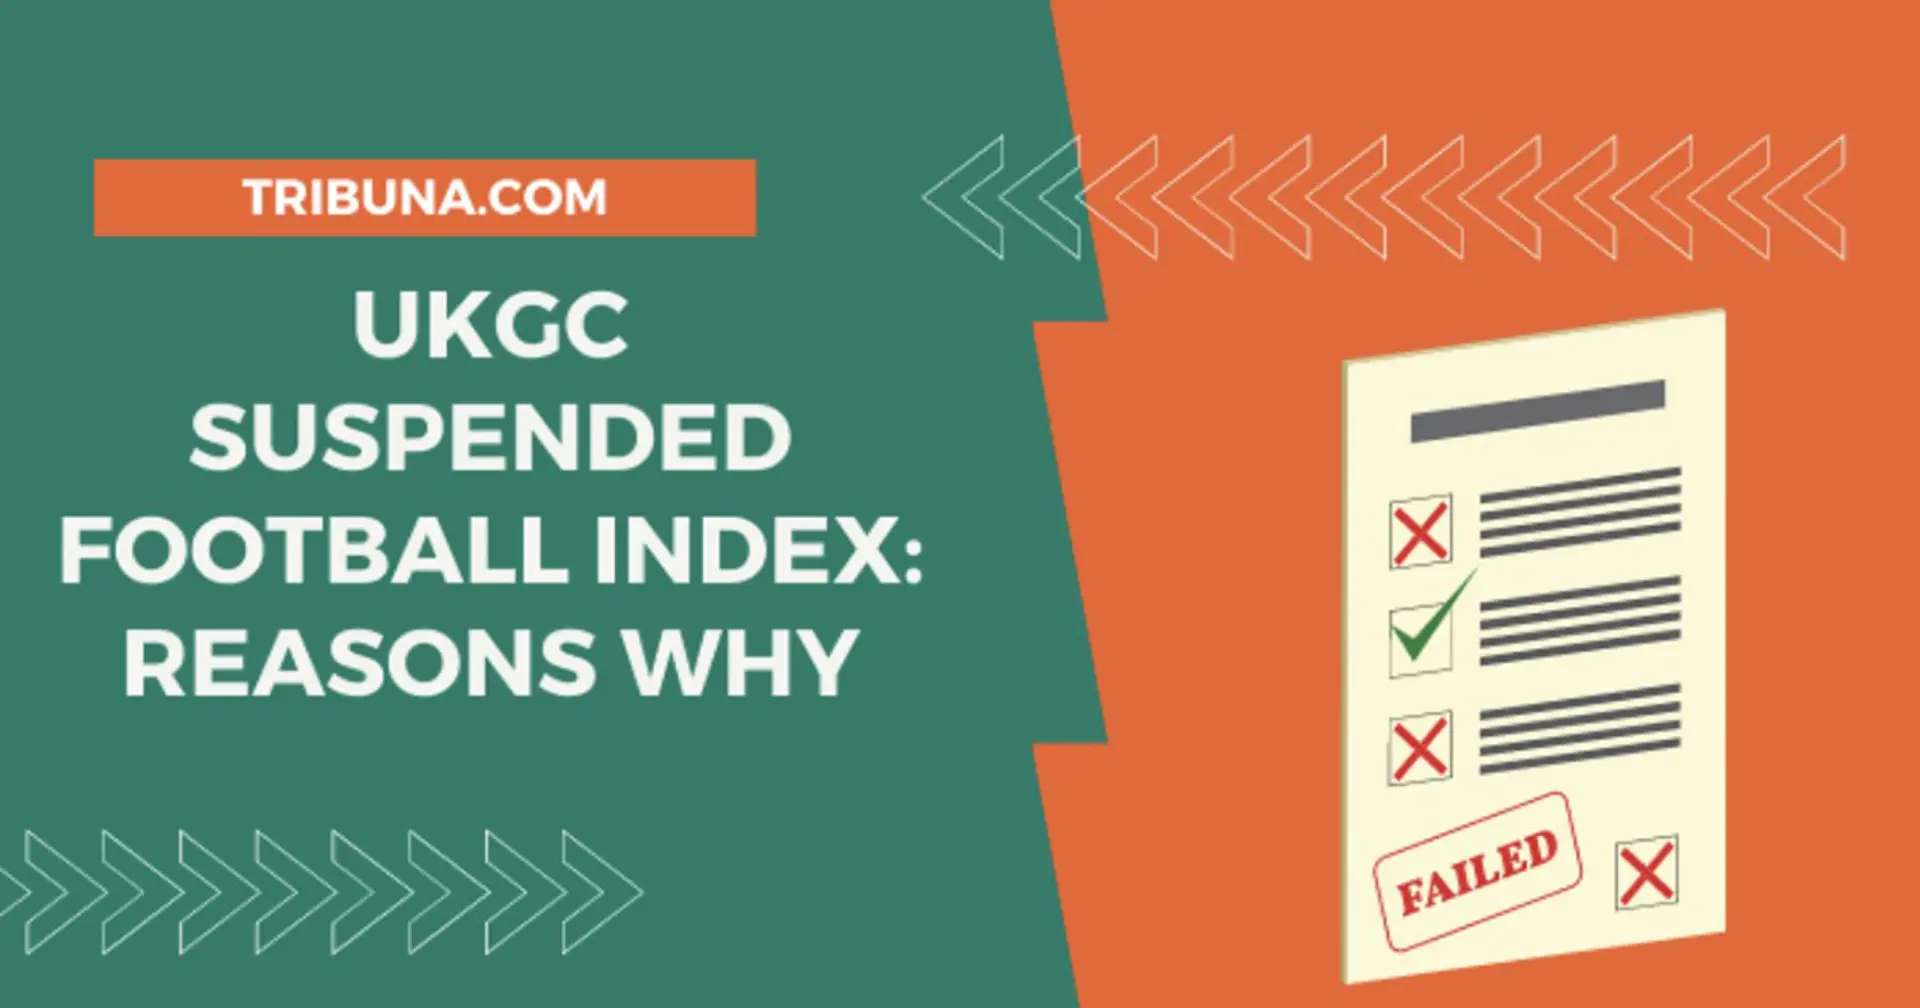 UKGC Suspended Football Index: Reasons Why